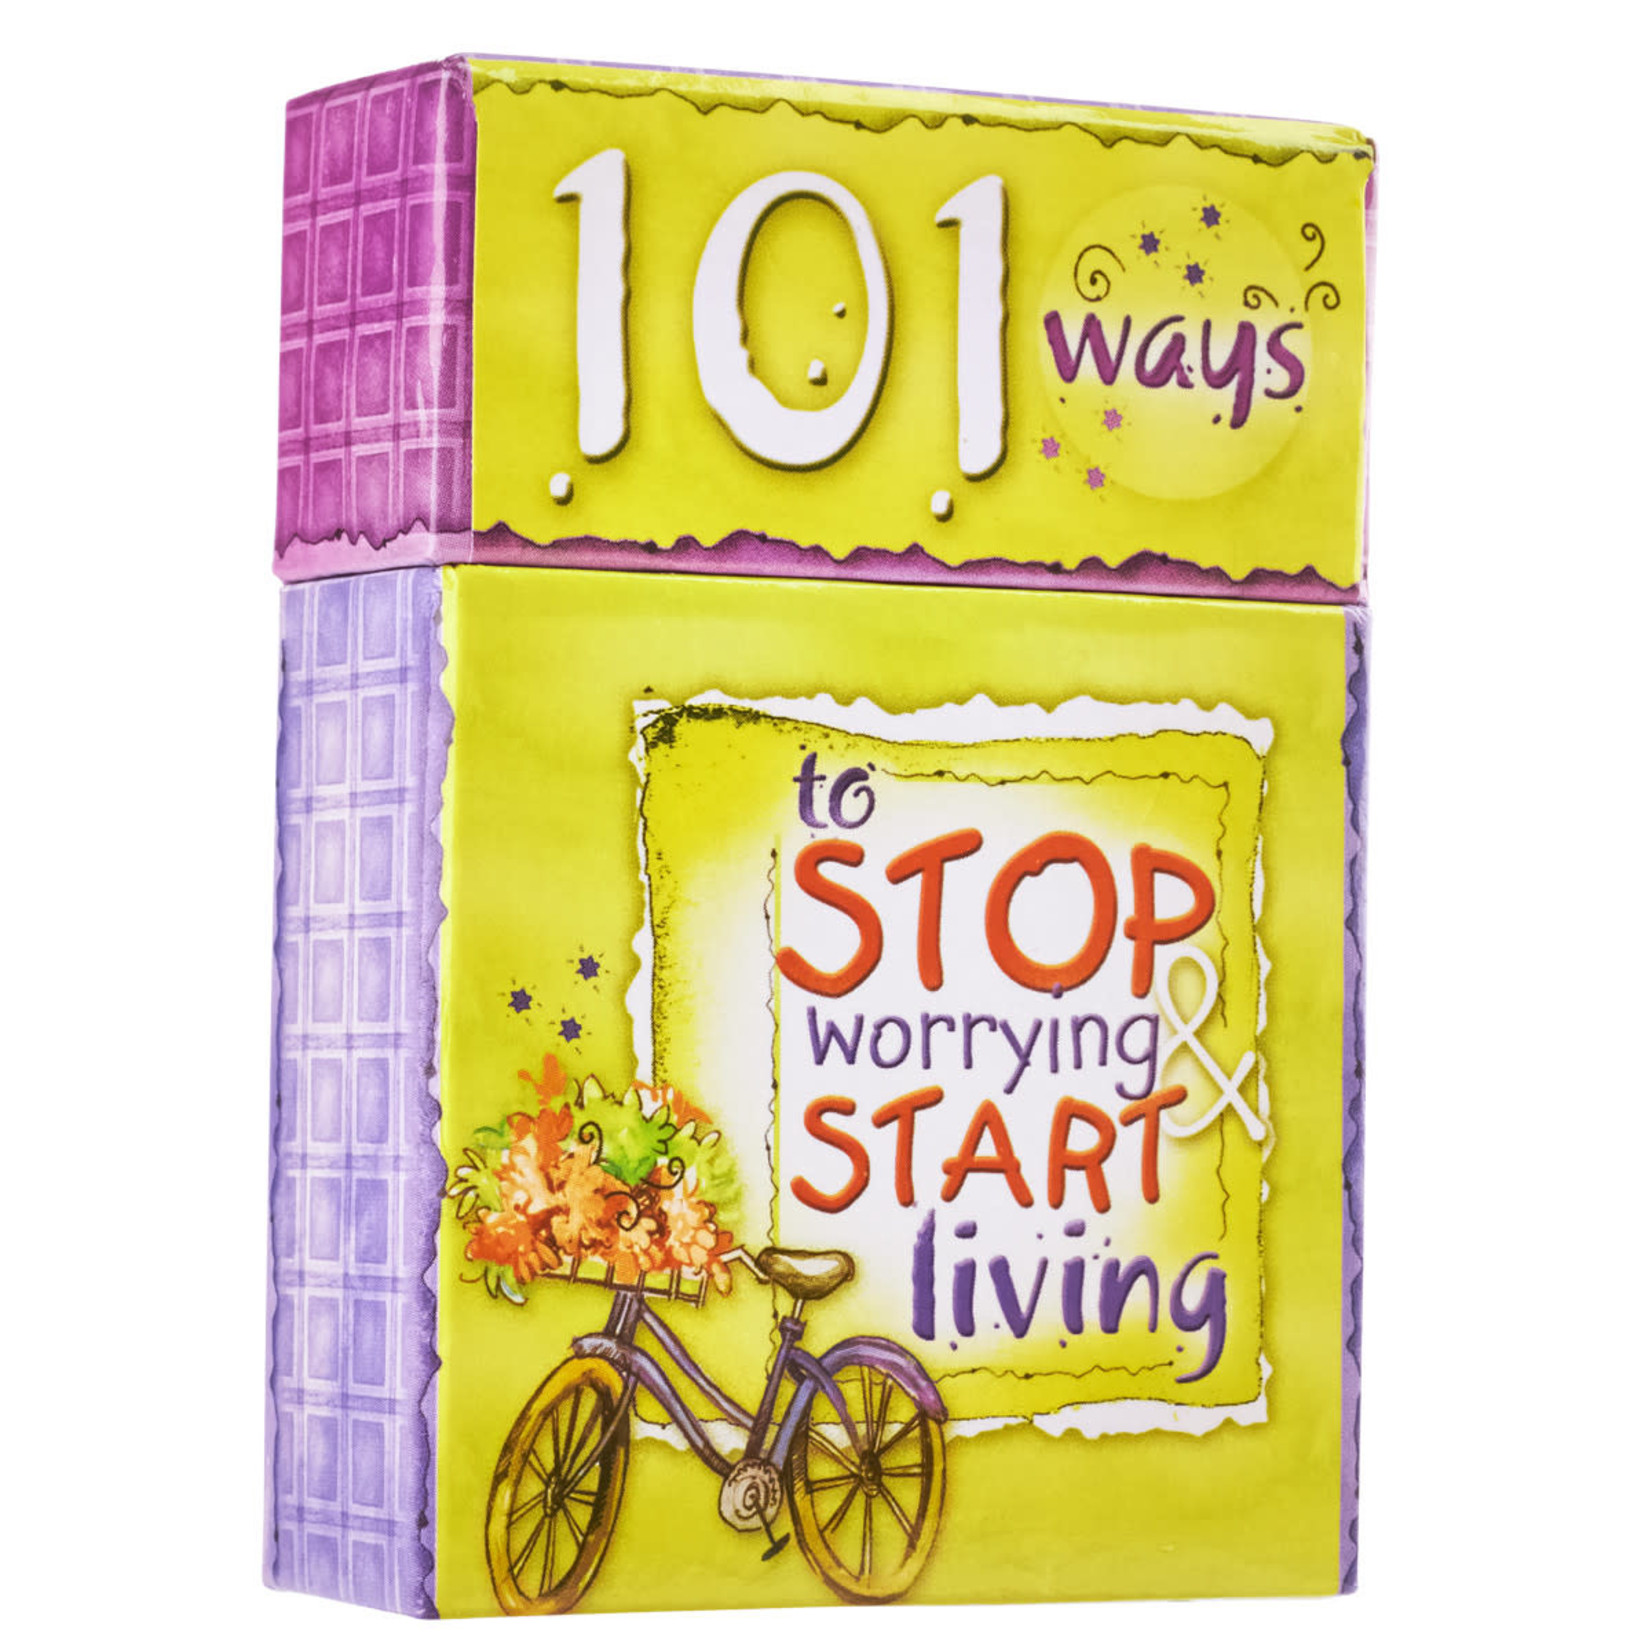 Christian Art Gifts 101 Ways to Stop Worrying & Start Living - Box of Blessings